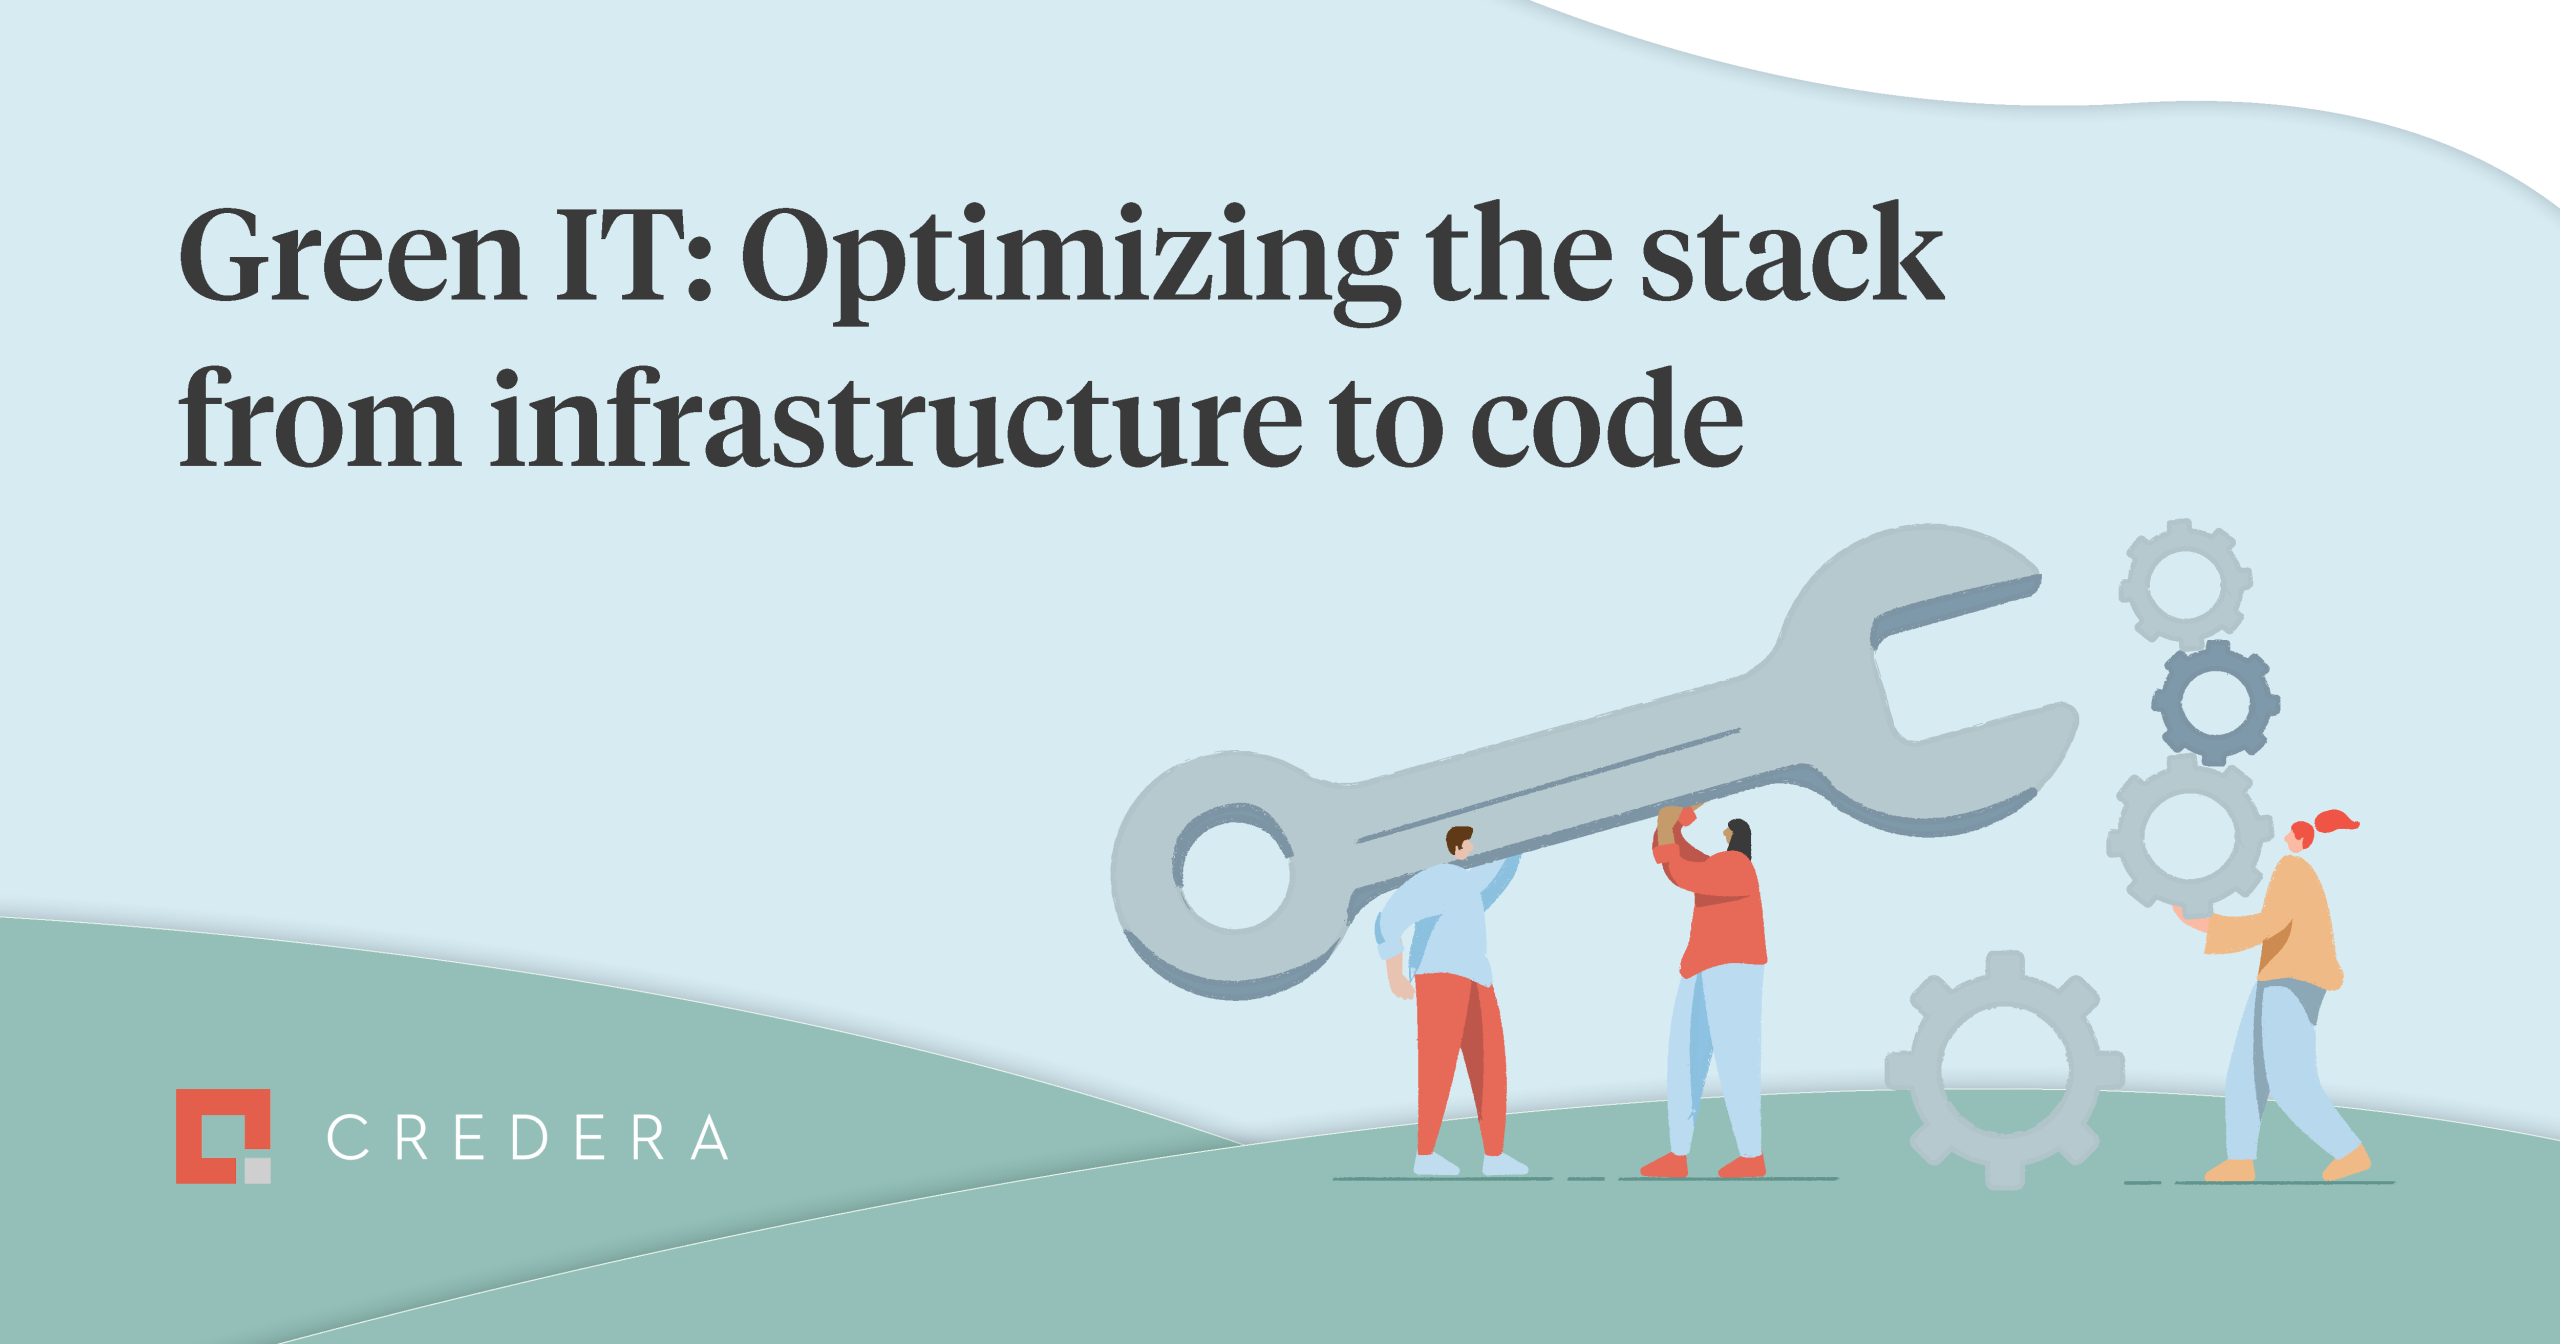 Green IT: Optimizing the stack from infrastructure to code